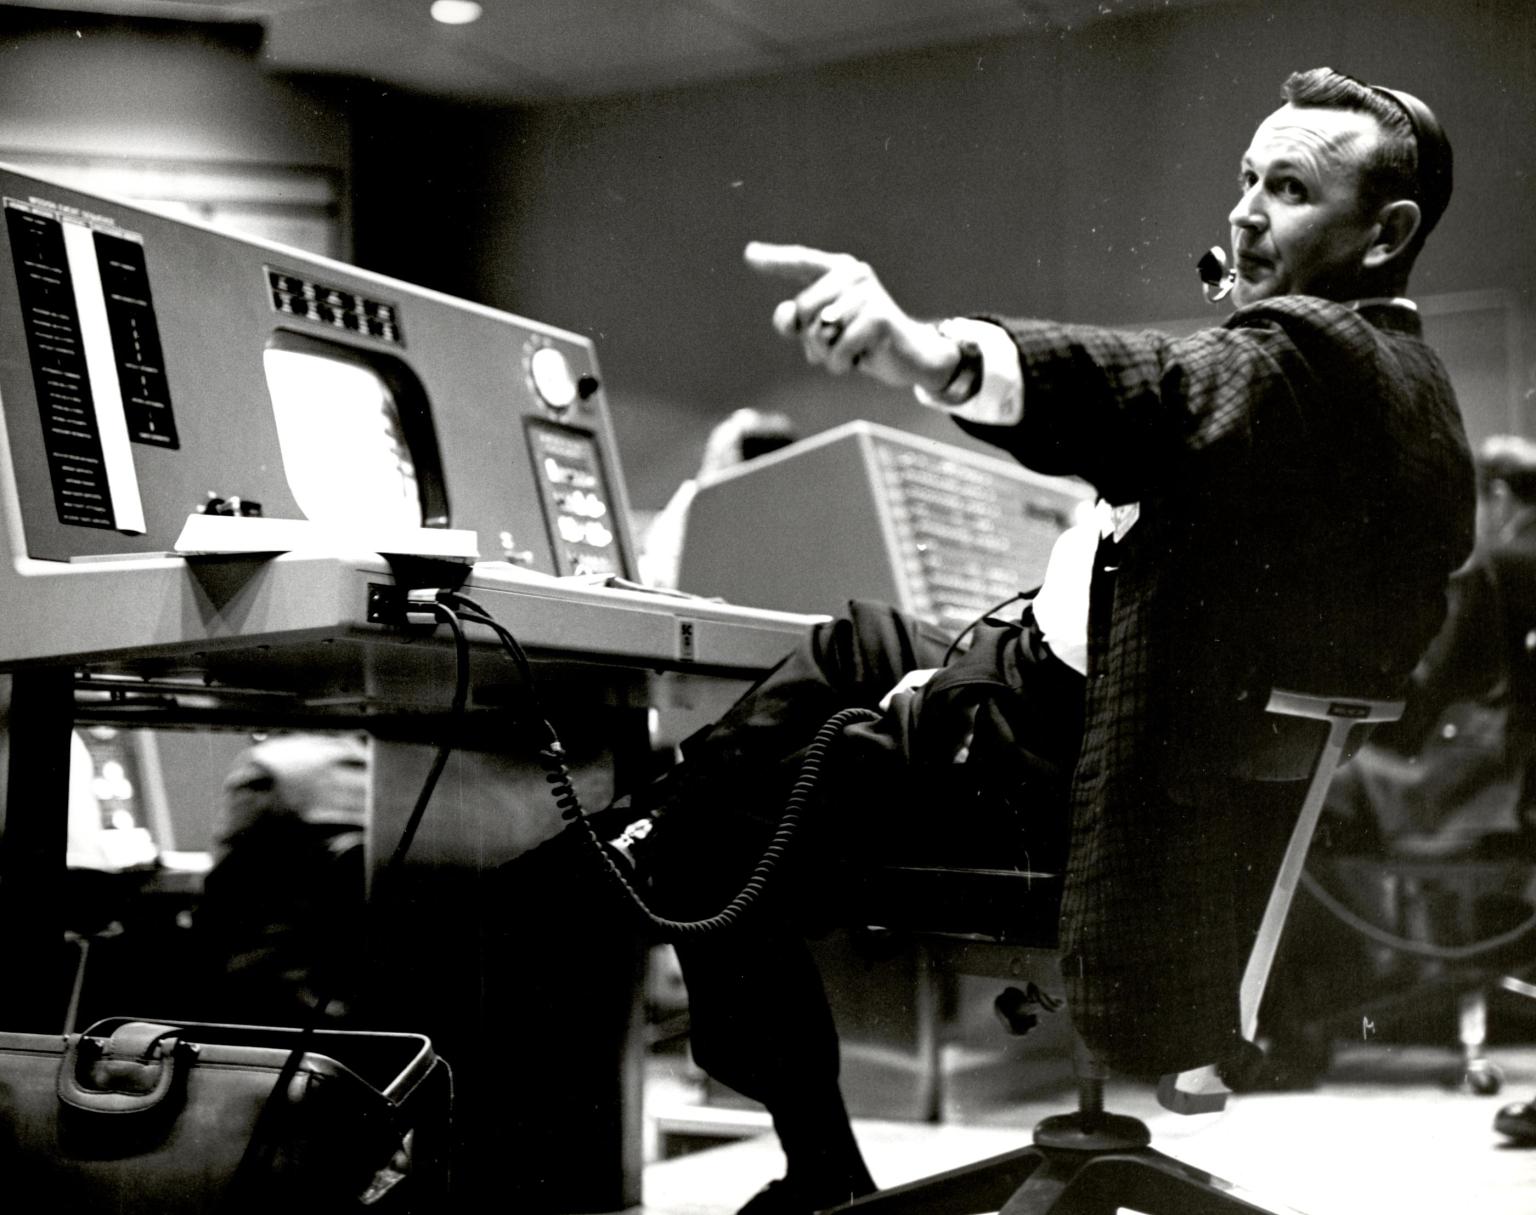 Flight Director Chris Kraft at his console at the Mercury Control Center pointing off to the left beyond the shot of the photo. Black and White Image.